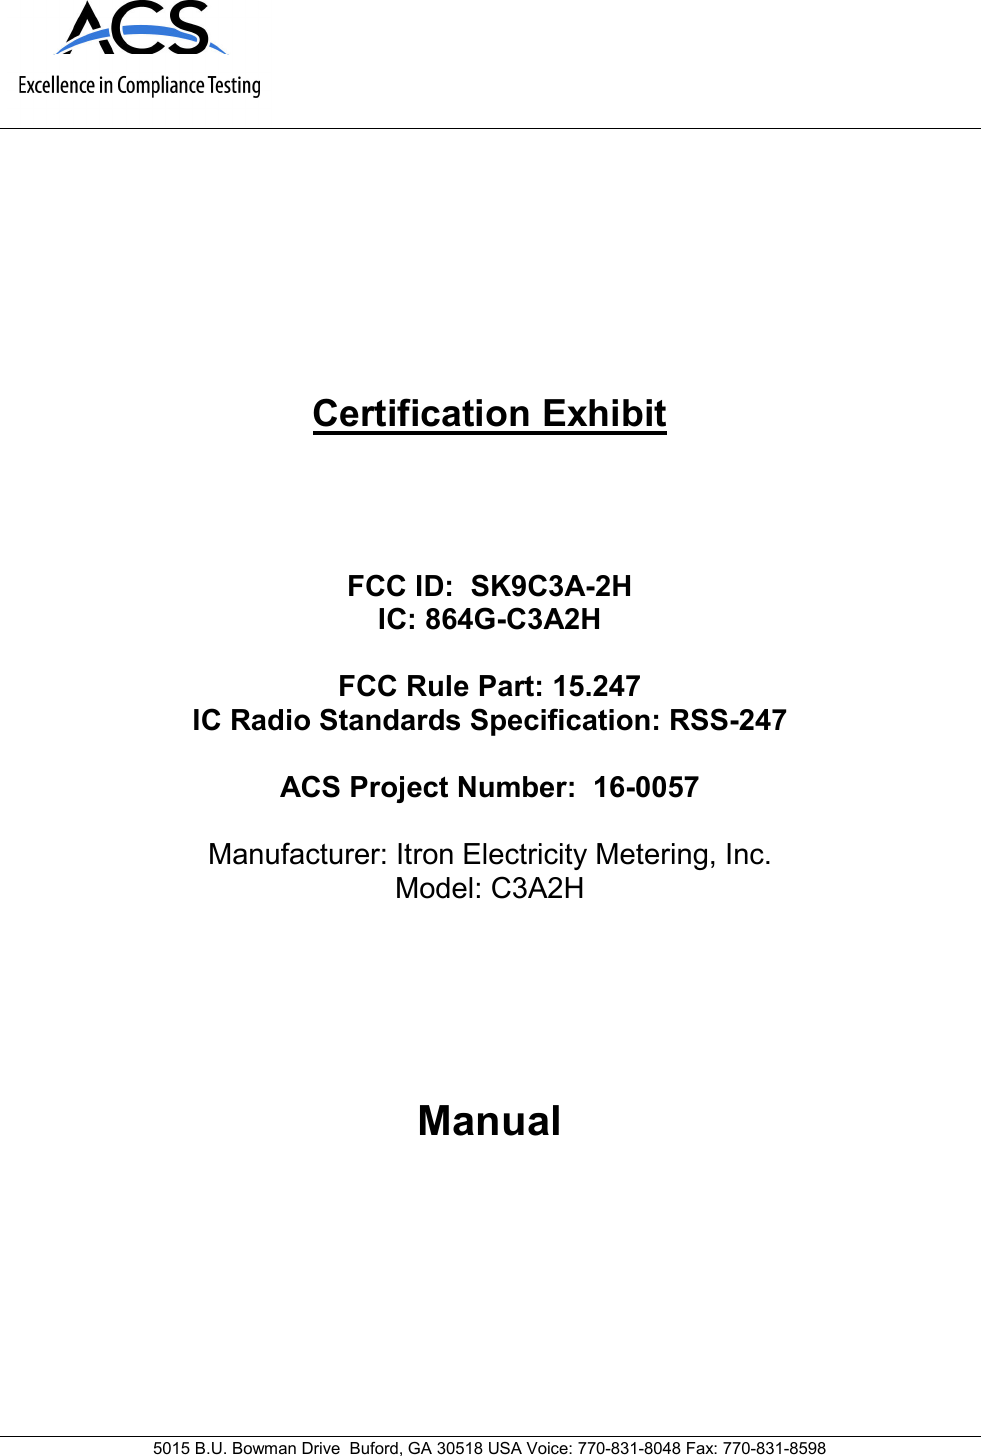      5015 B.U. Bowman Drive  Buford, GA 30518 USA Voice: 770-831-8048 Fax: 770-831-8598   Certification Exhibit     FCC ID:  SK9C3A-2H IC: 864G-C3A2H  FCC Rule Part: 15.247 IC Radio Standards Specification: RSS-247  ACS Project Number:  16-0057   Manufacturer: Itron Electricity Metering, Inc. Model: C3A2H     Manual            